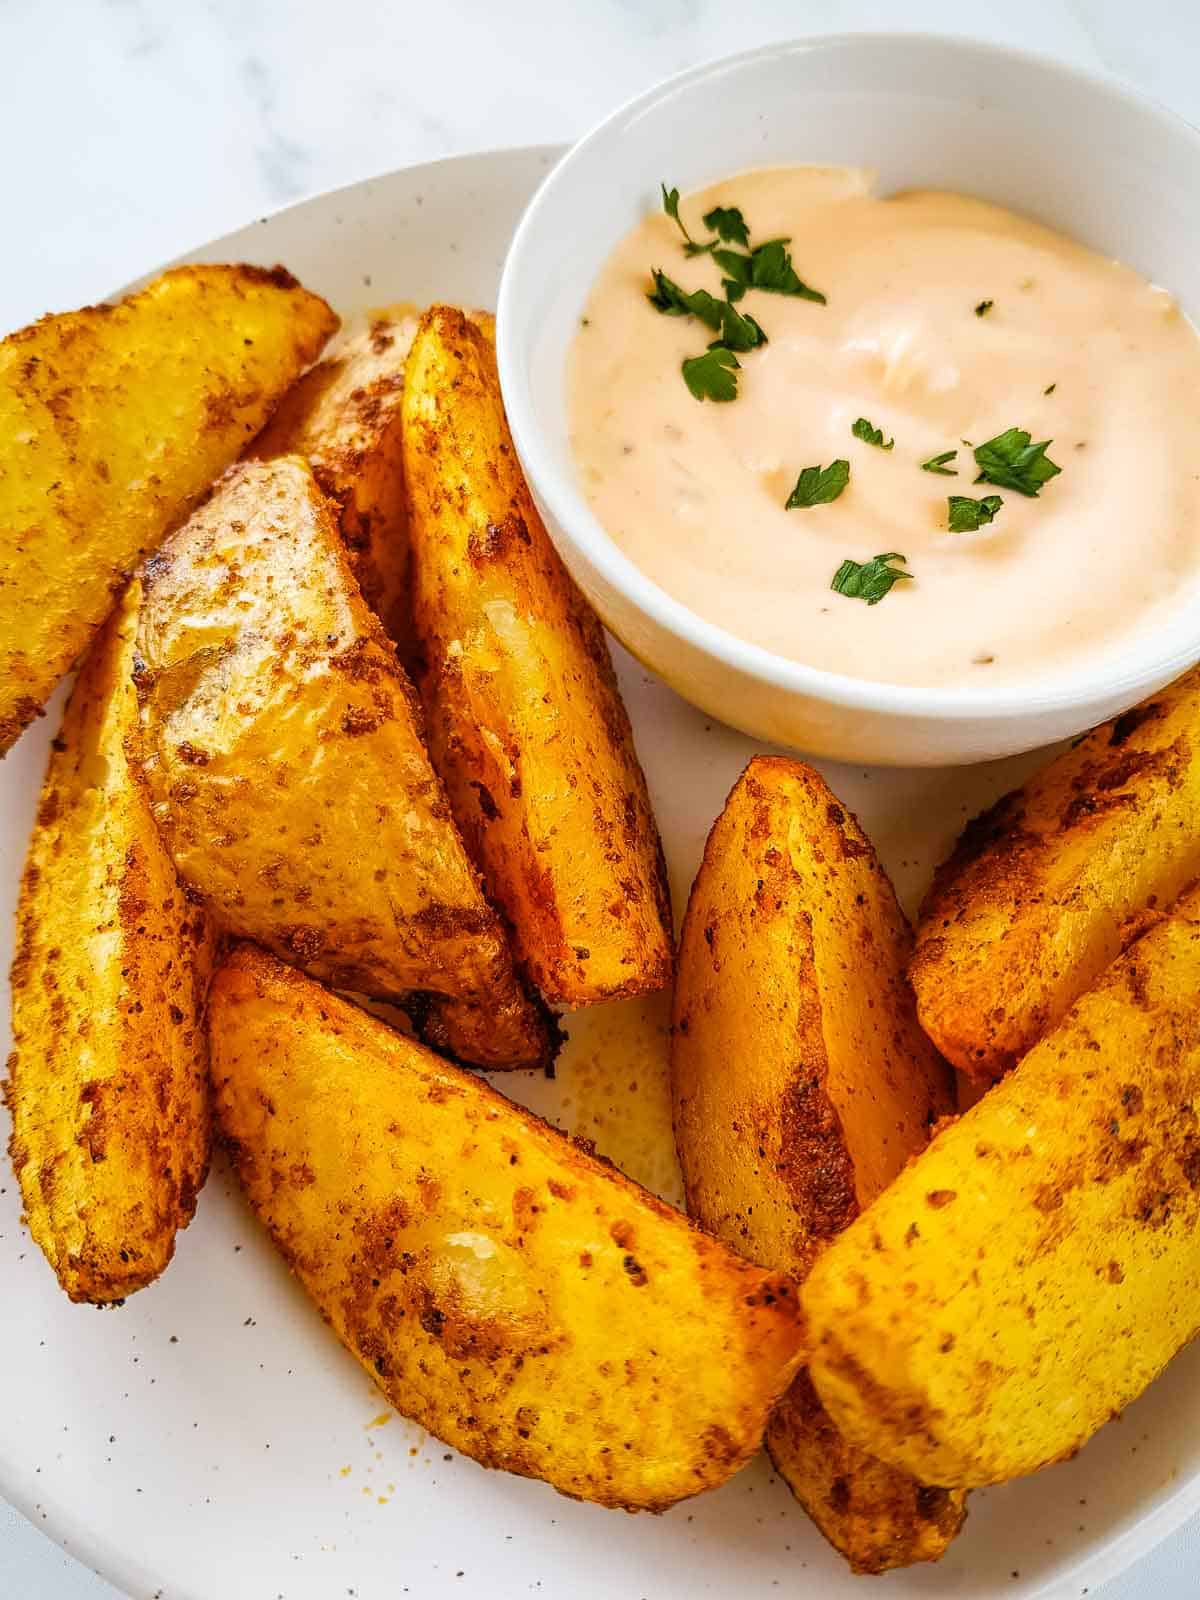 Crispy air fried potato wedges with aioli on the side.